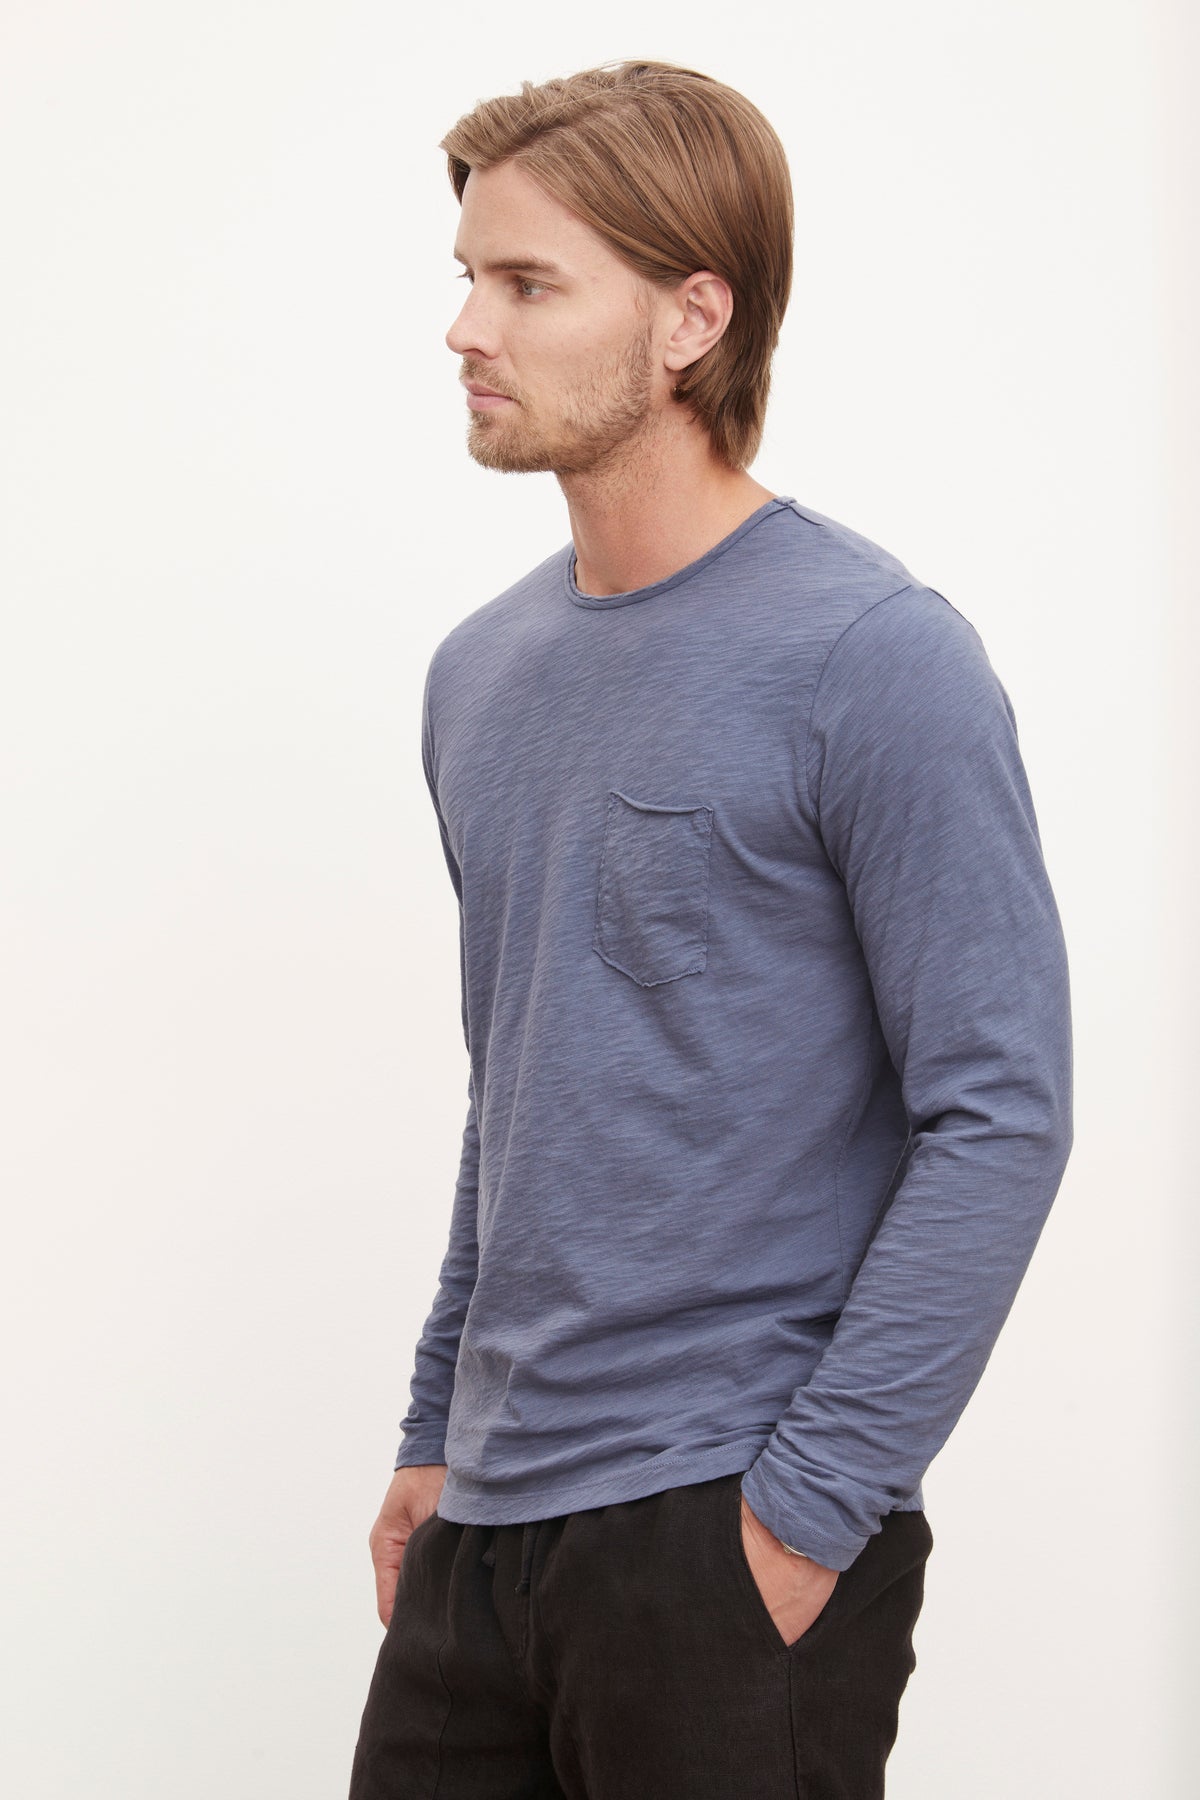 A man wearing a blue long sleeve SIMEON RAW EDGE COTTON SLUB TEE, made from soft slub cotton fabric and featuring raw-edge details on the sleeves by Velvet by Graham & Spencer.-36009054404801